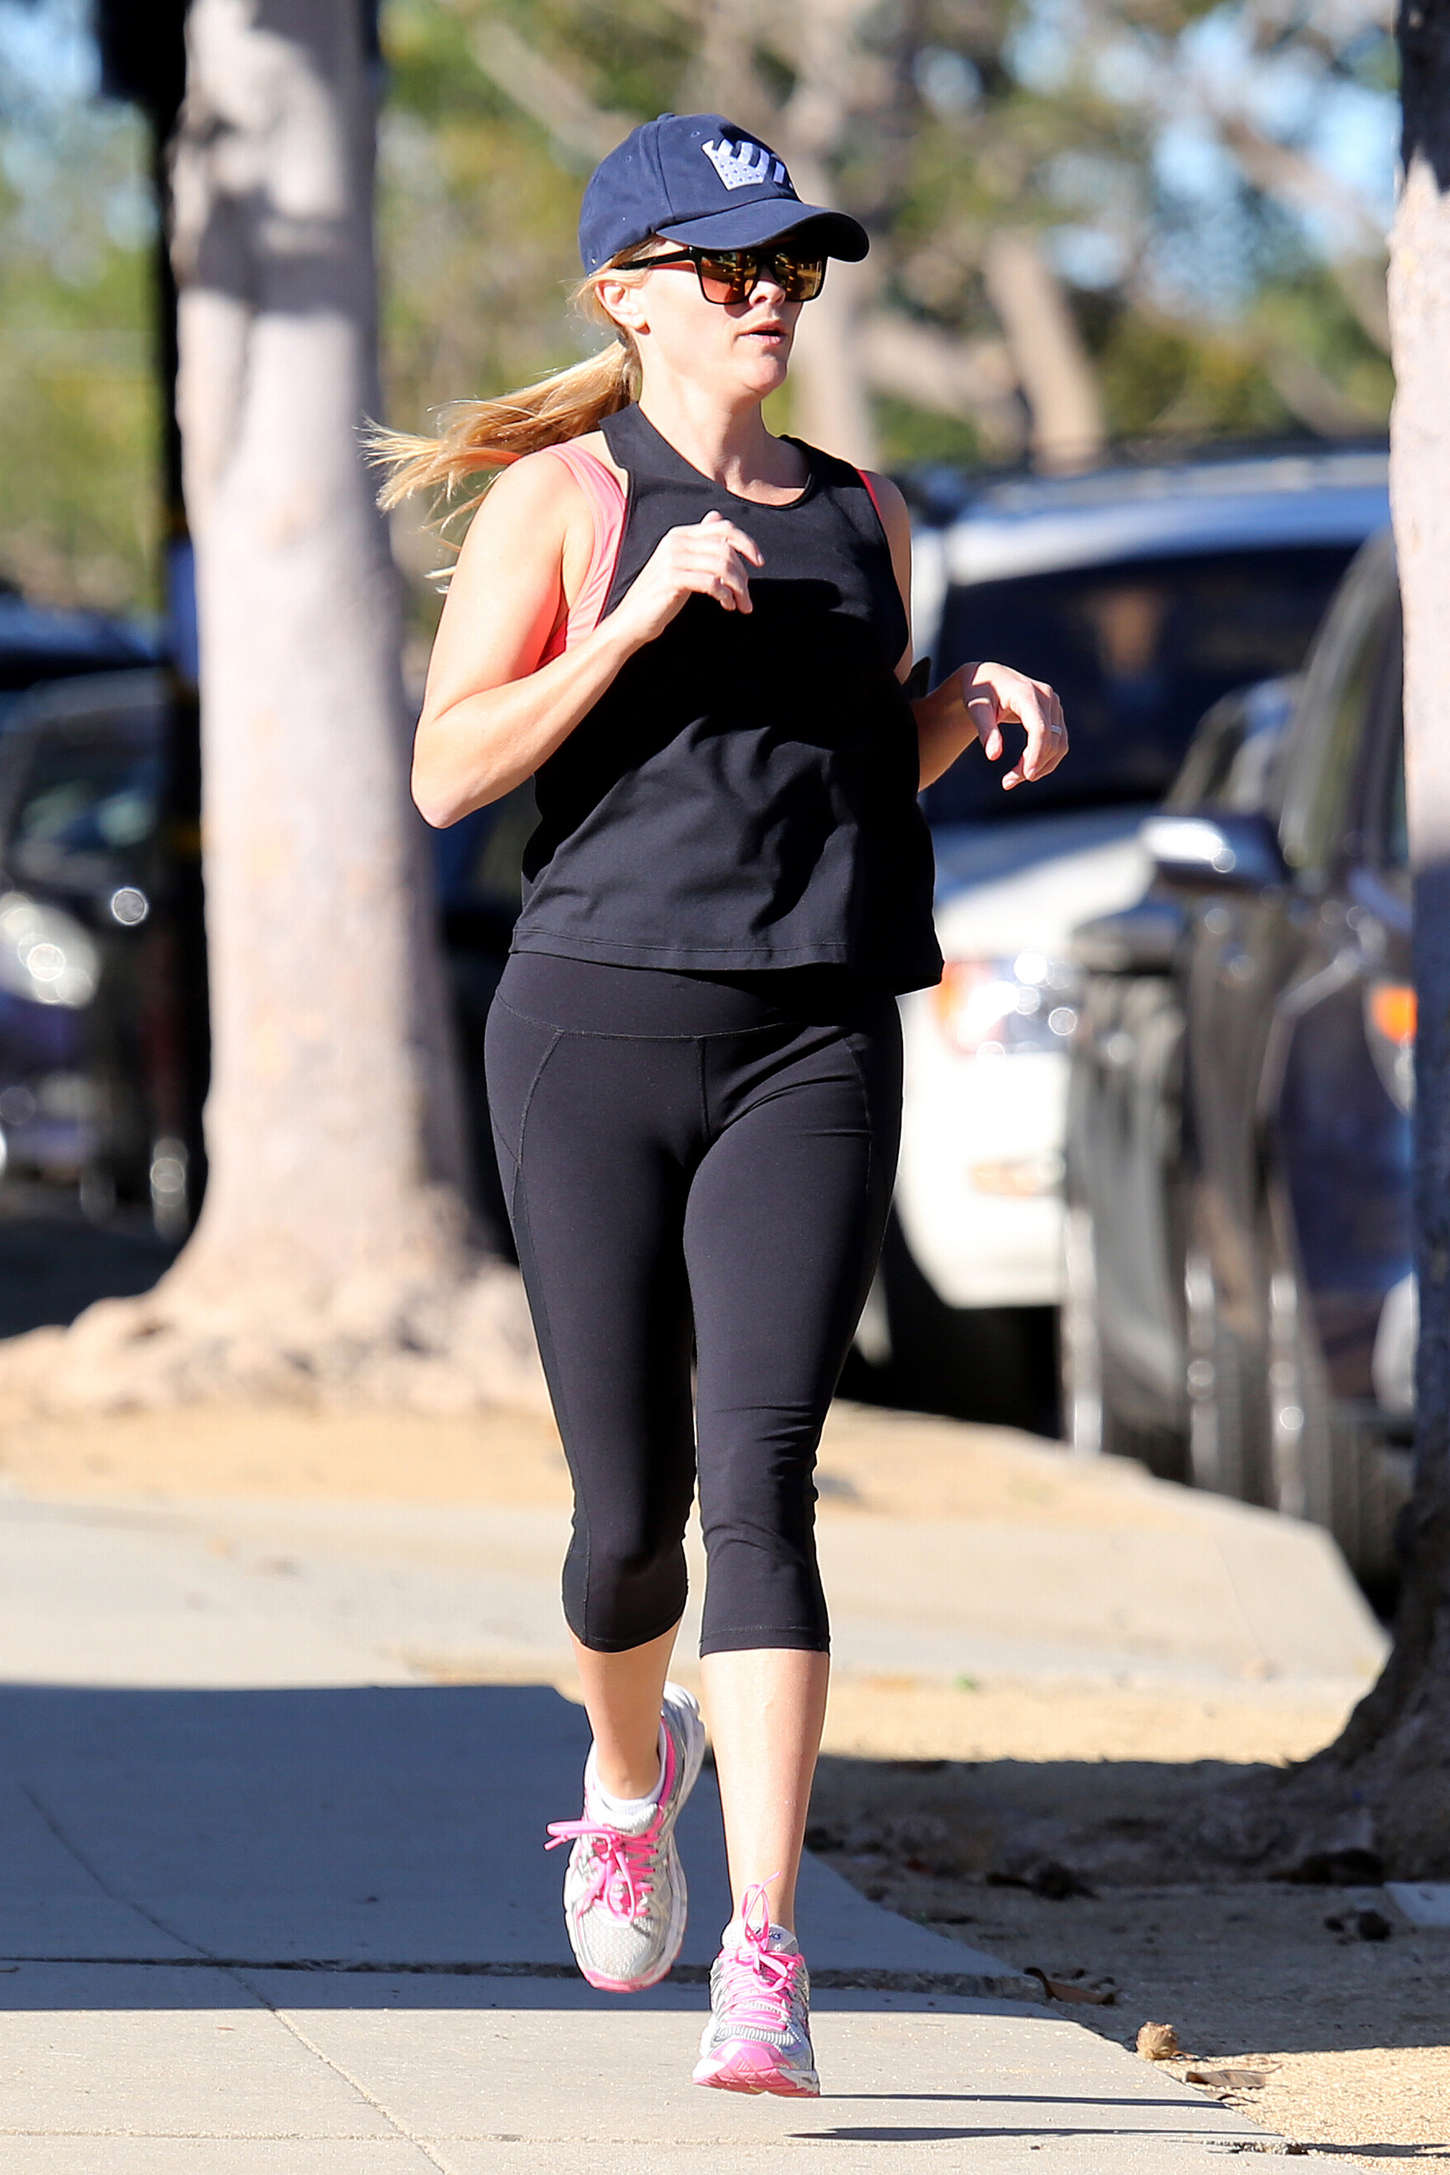 Reese Witherspoon in Tights Jogging.